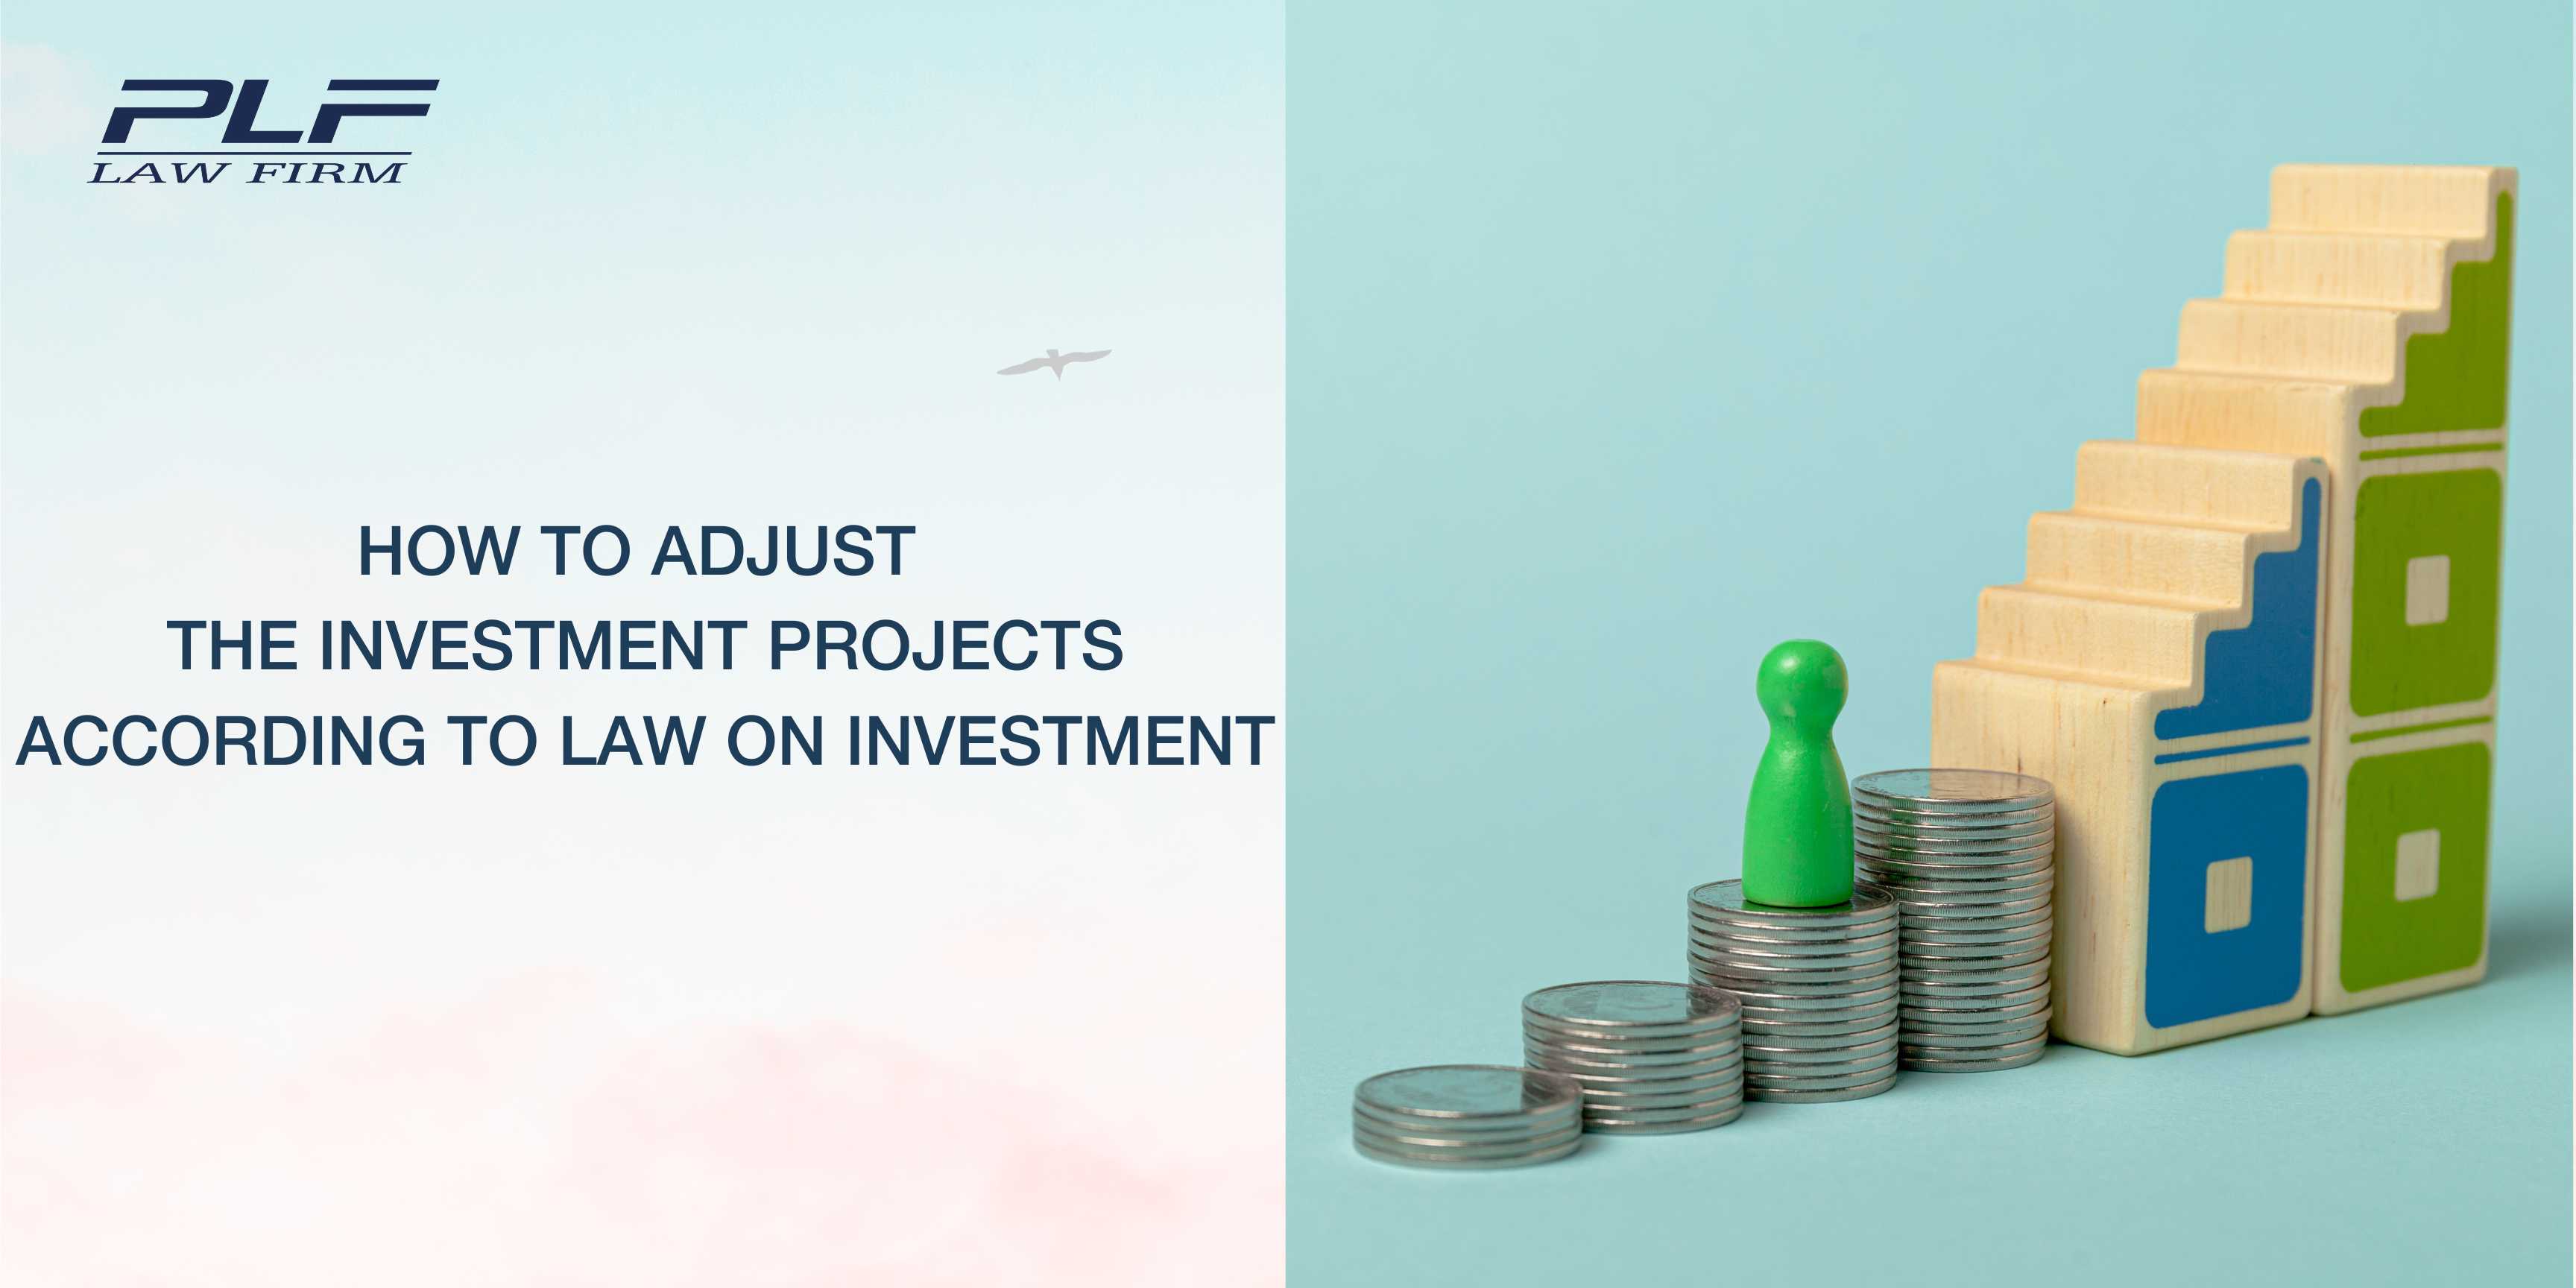 Plf How To Adjust The Investment Projects According To Law On Investment